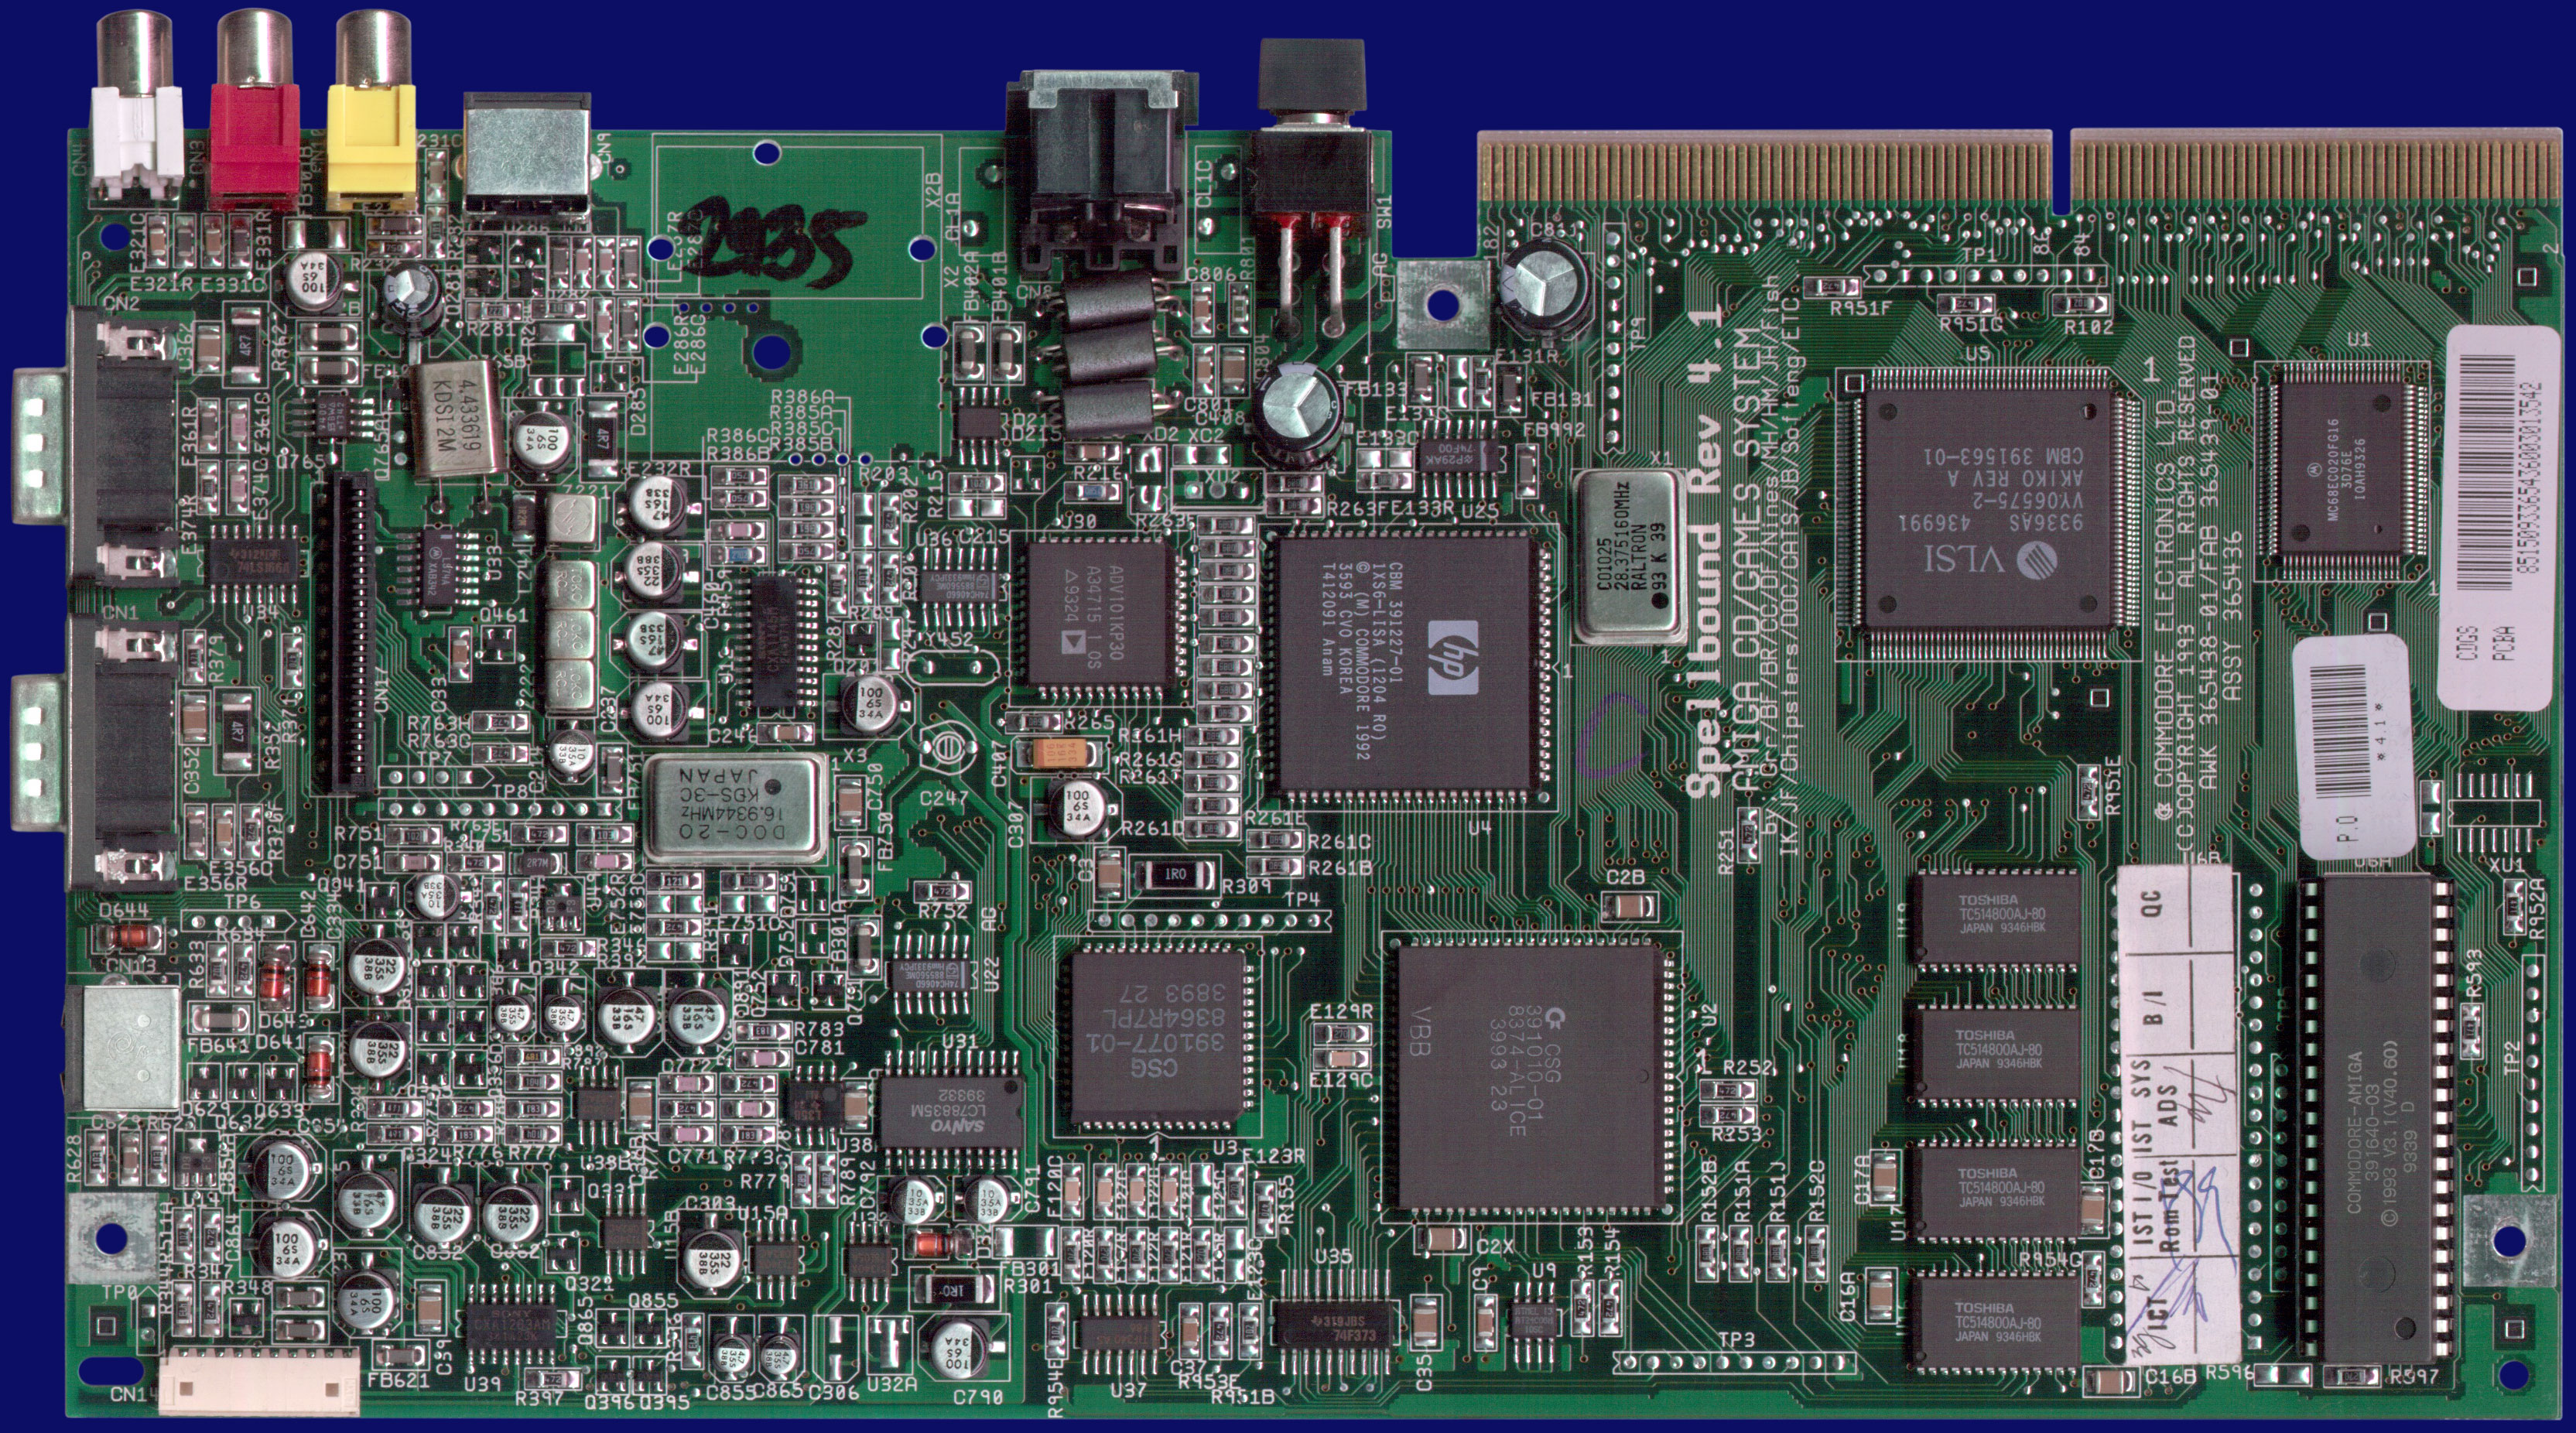 Commodore CD32 - Rev 4.1 motherboard, front side